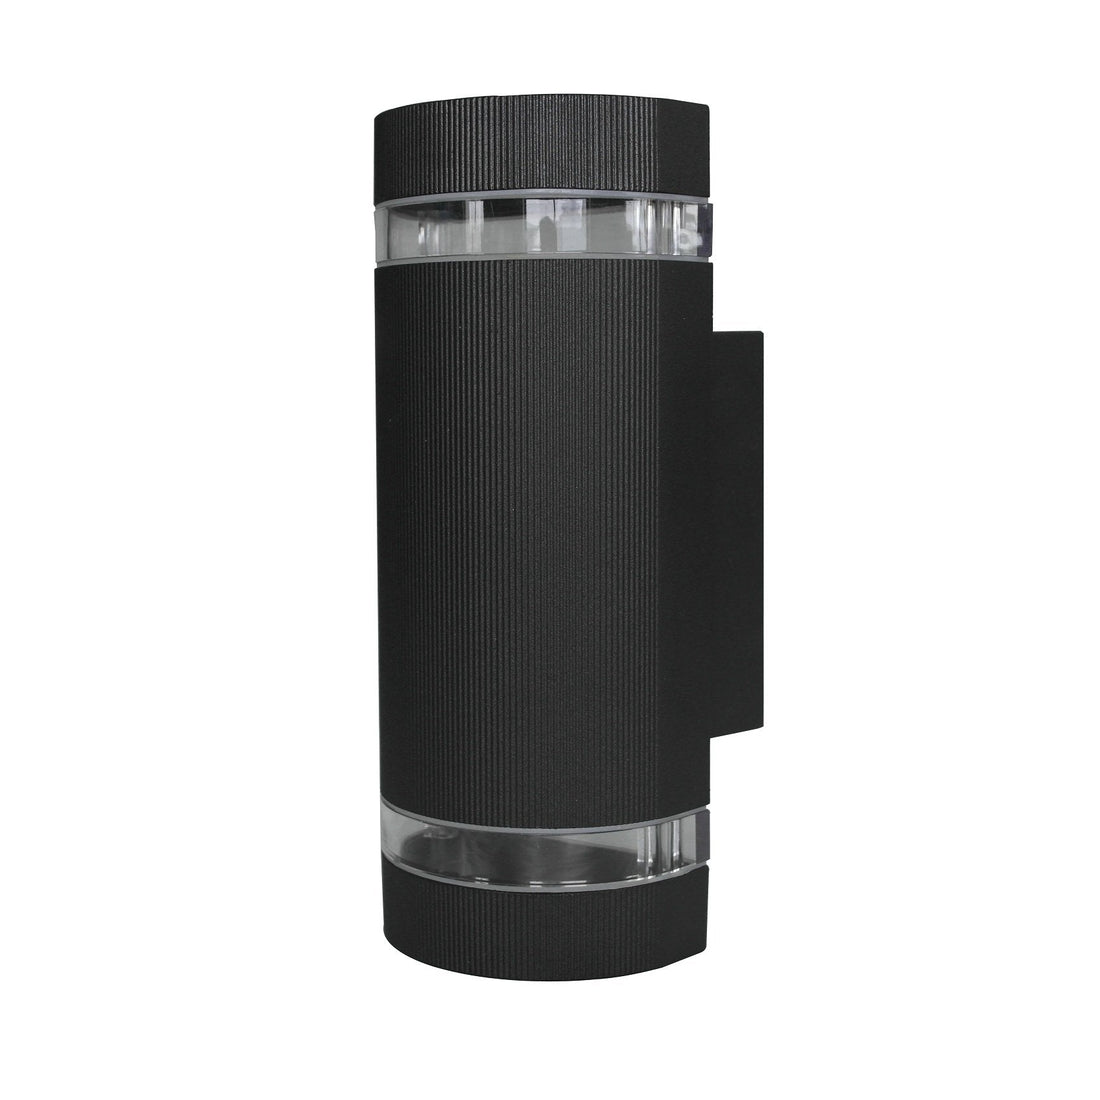 3A-256-2 2 Light Black Exterior Up and Down Wall Light